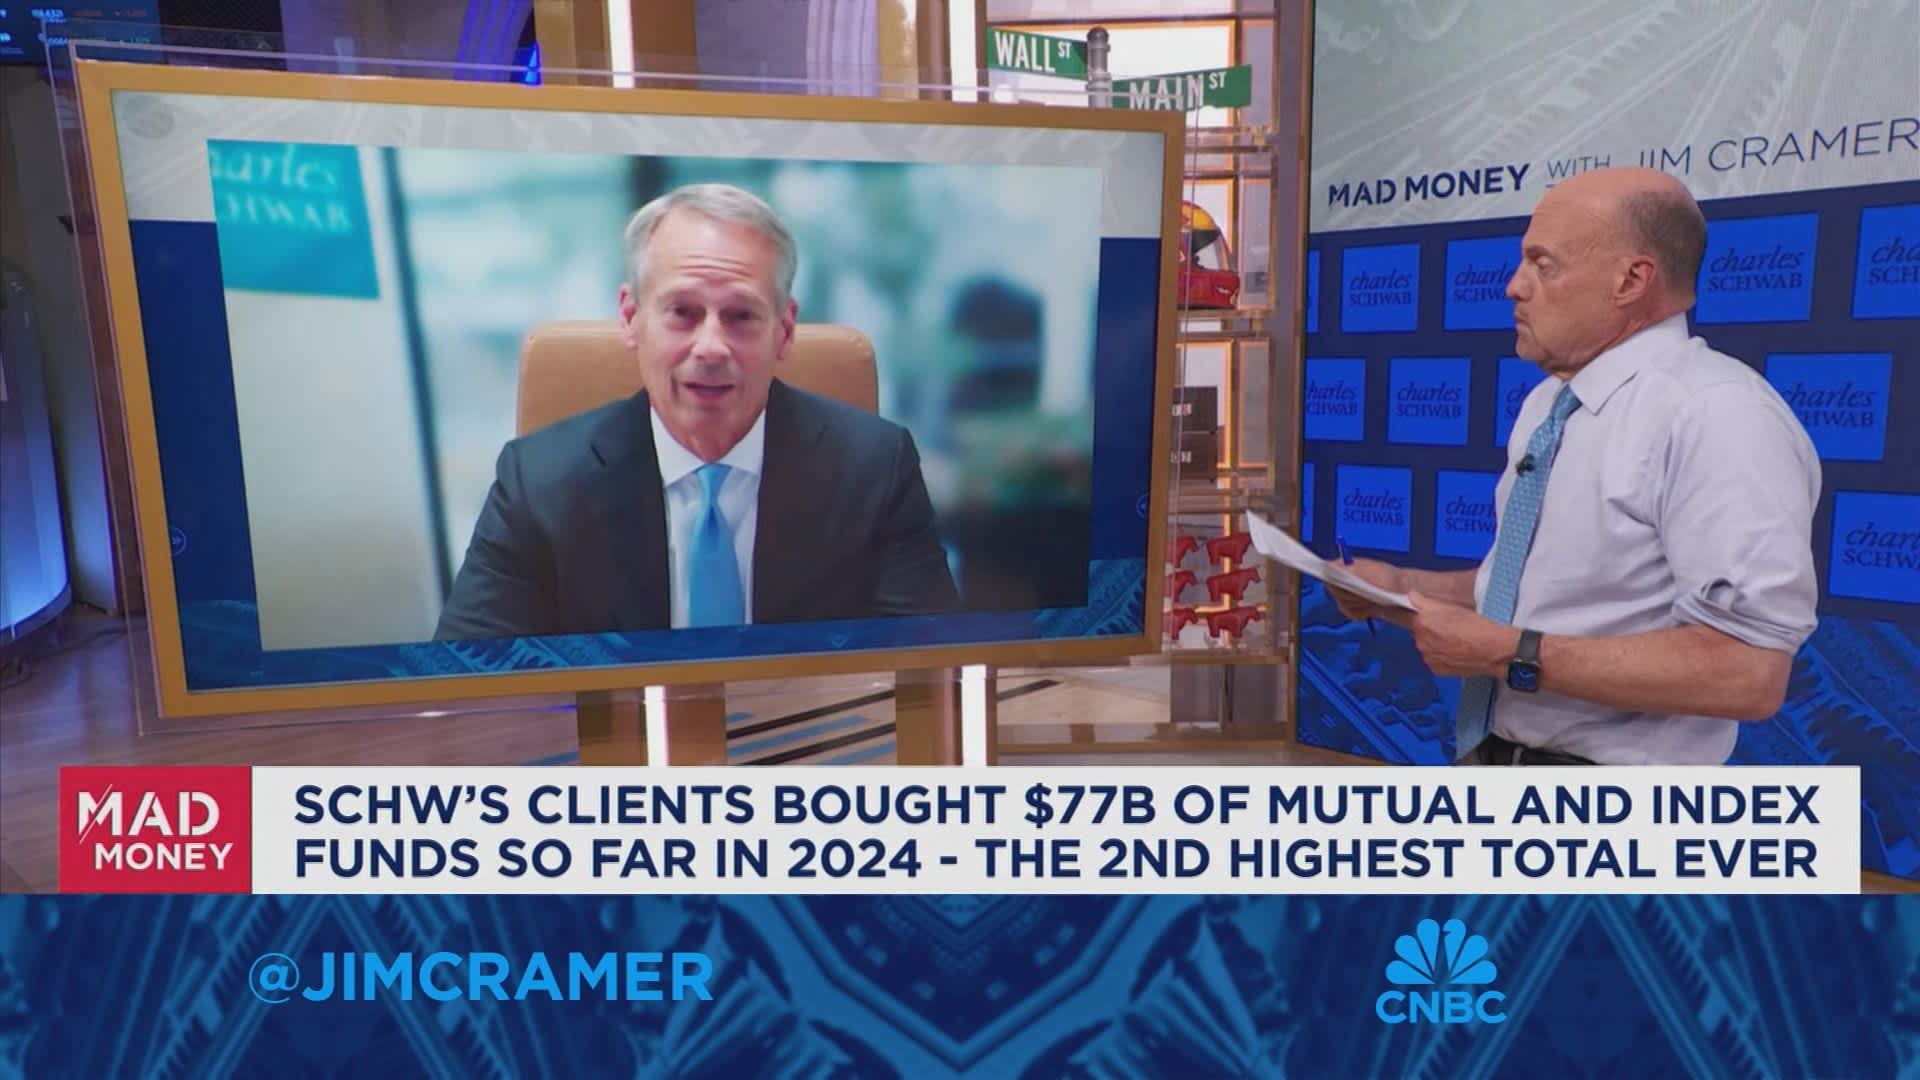 It's completely up to the client when they are self directed, says Charles Schwab CEO